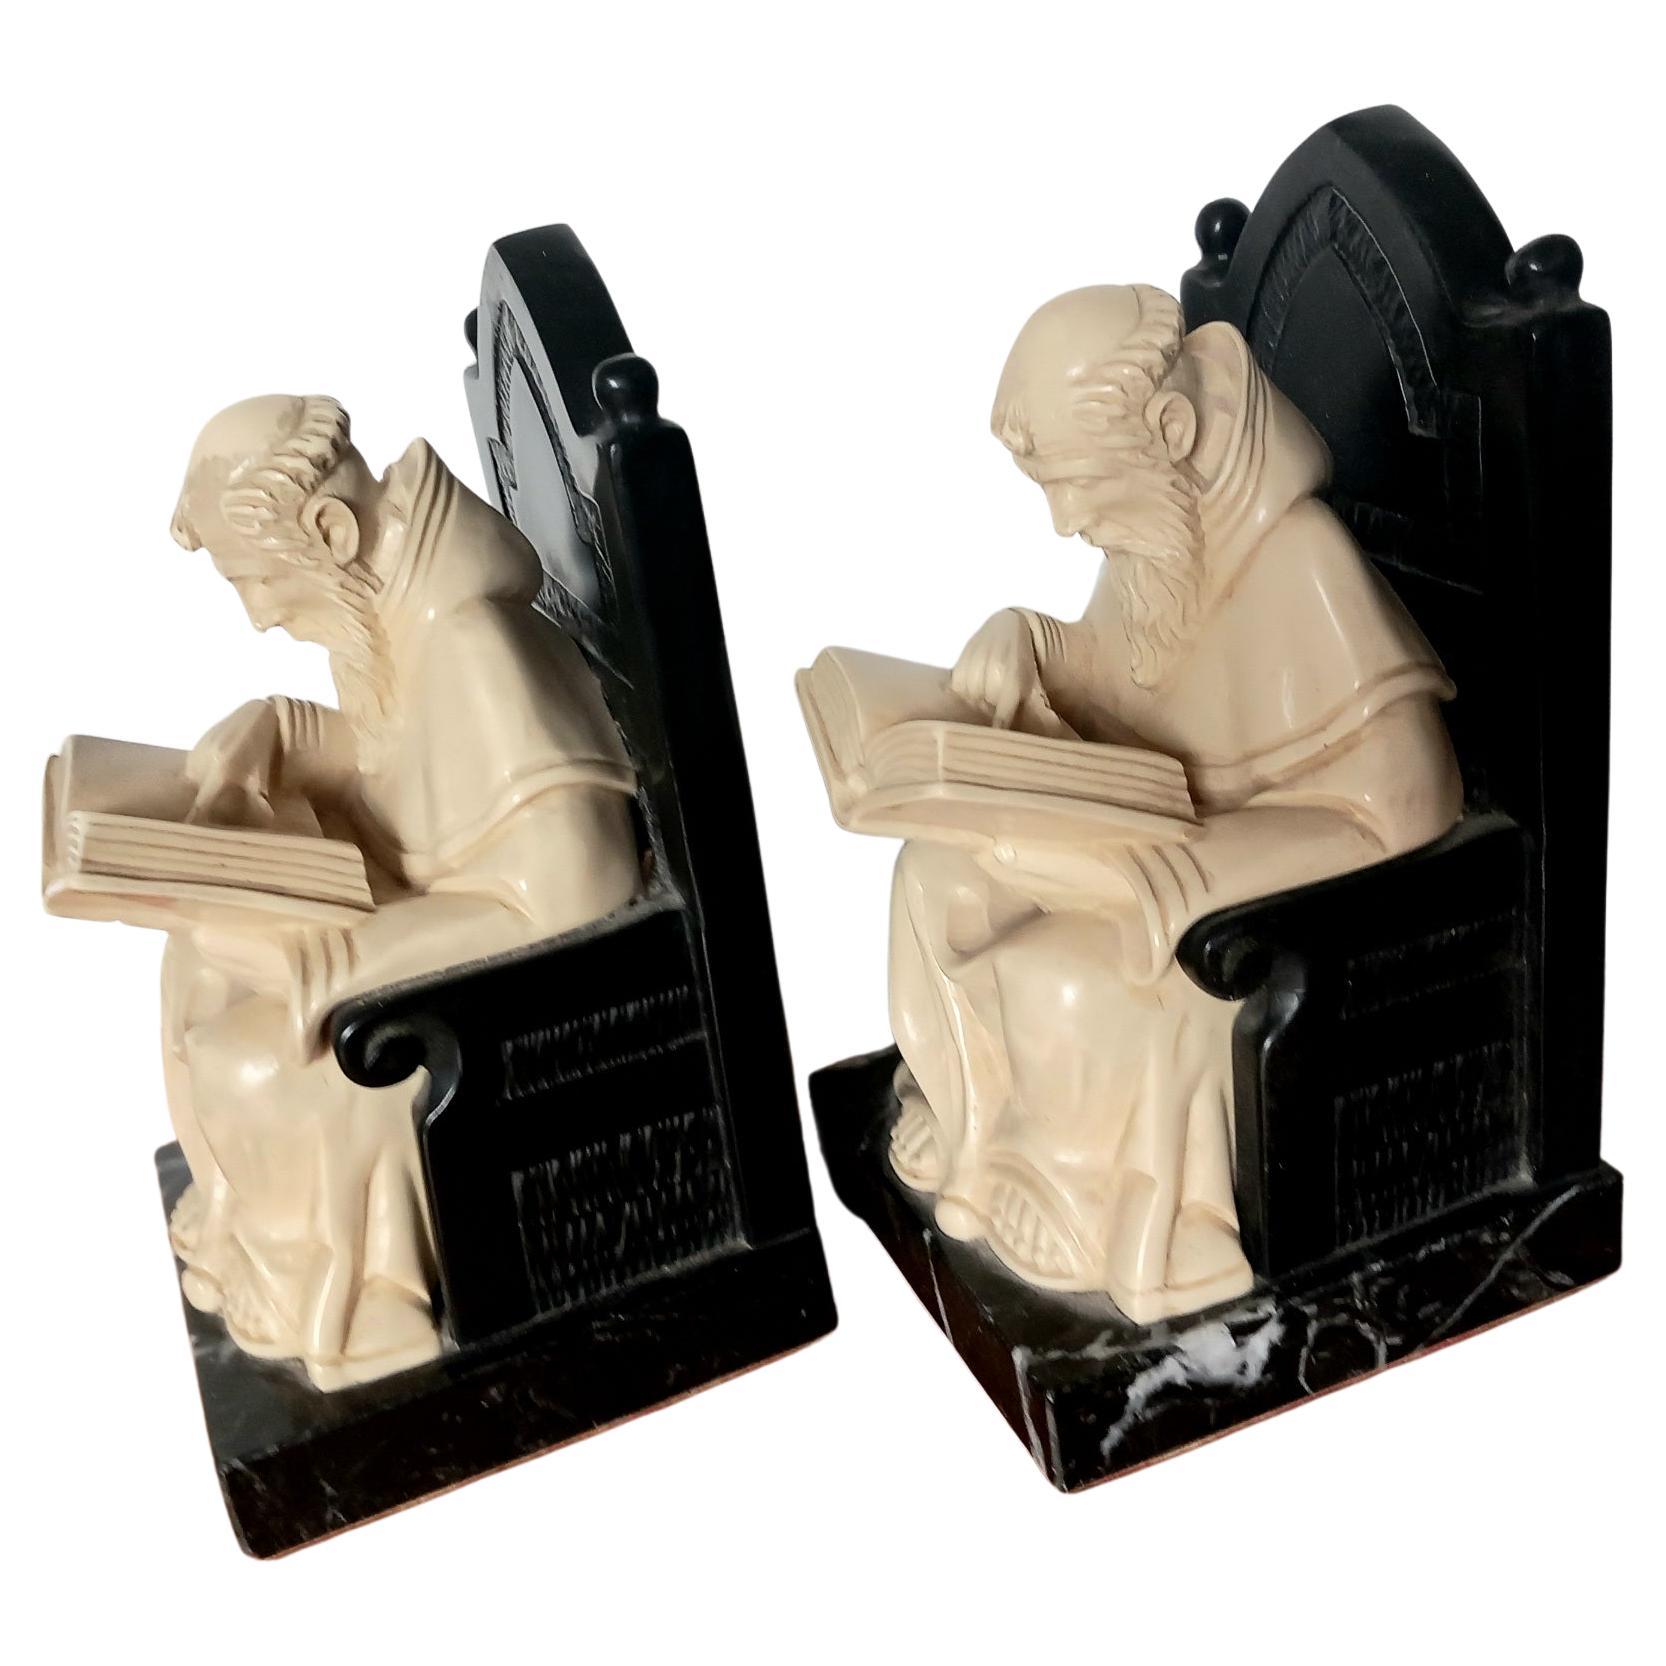 Alabaster and marble bookends in the shape of monks sitting on a throne reading a book. Figure of a monk is made of Bakelite or similar that rests on the albaster bench in Italian marble.
(a couple carved entirely in marble or alabaster is available